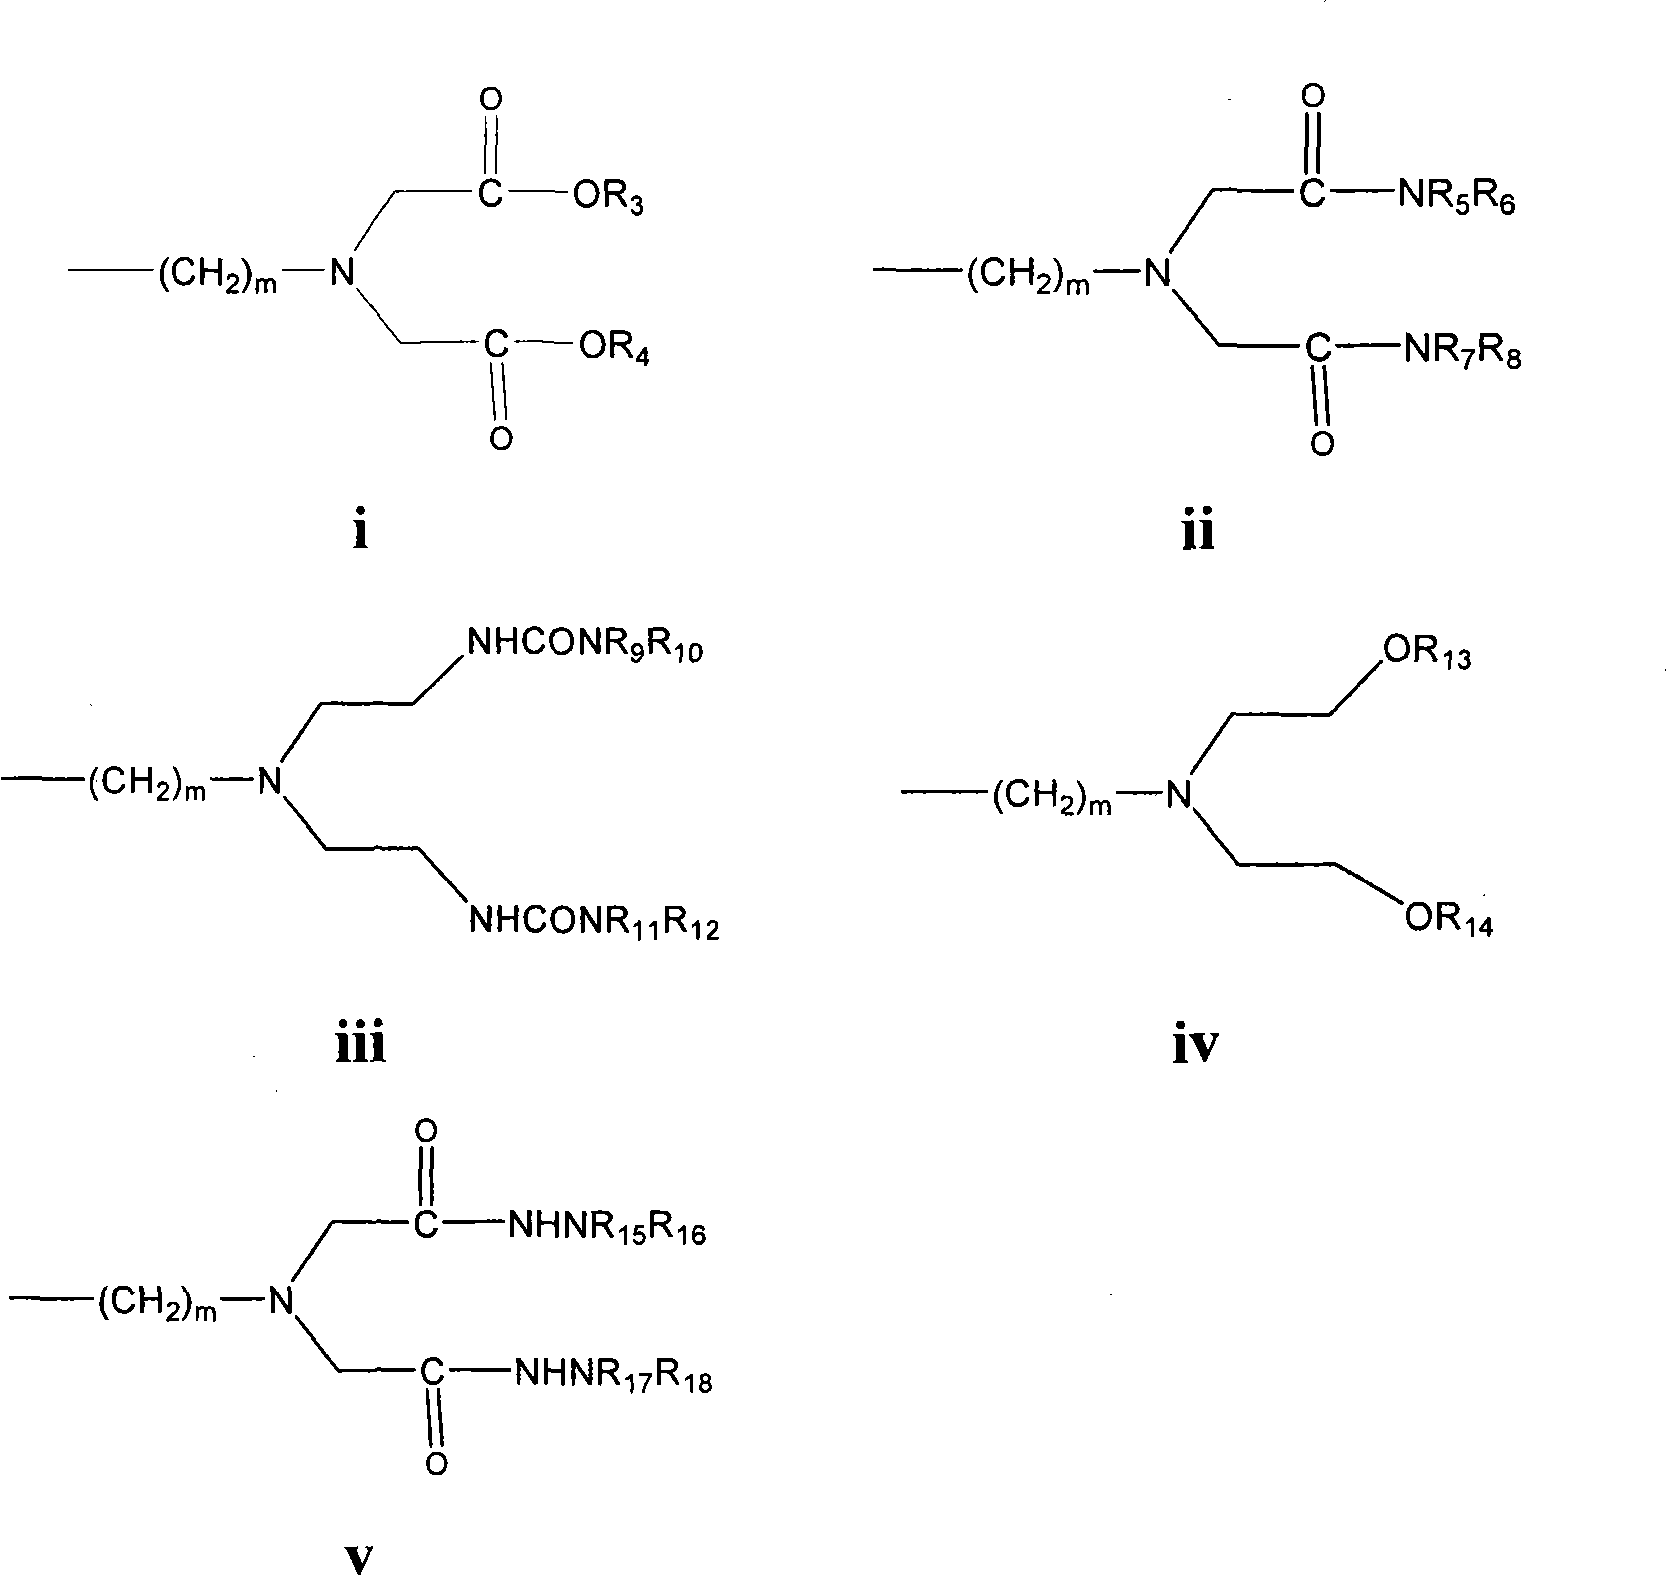 Antagonist of luteinizing hormone releasing hormone (LHRH) containing hydantoin structure